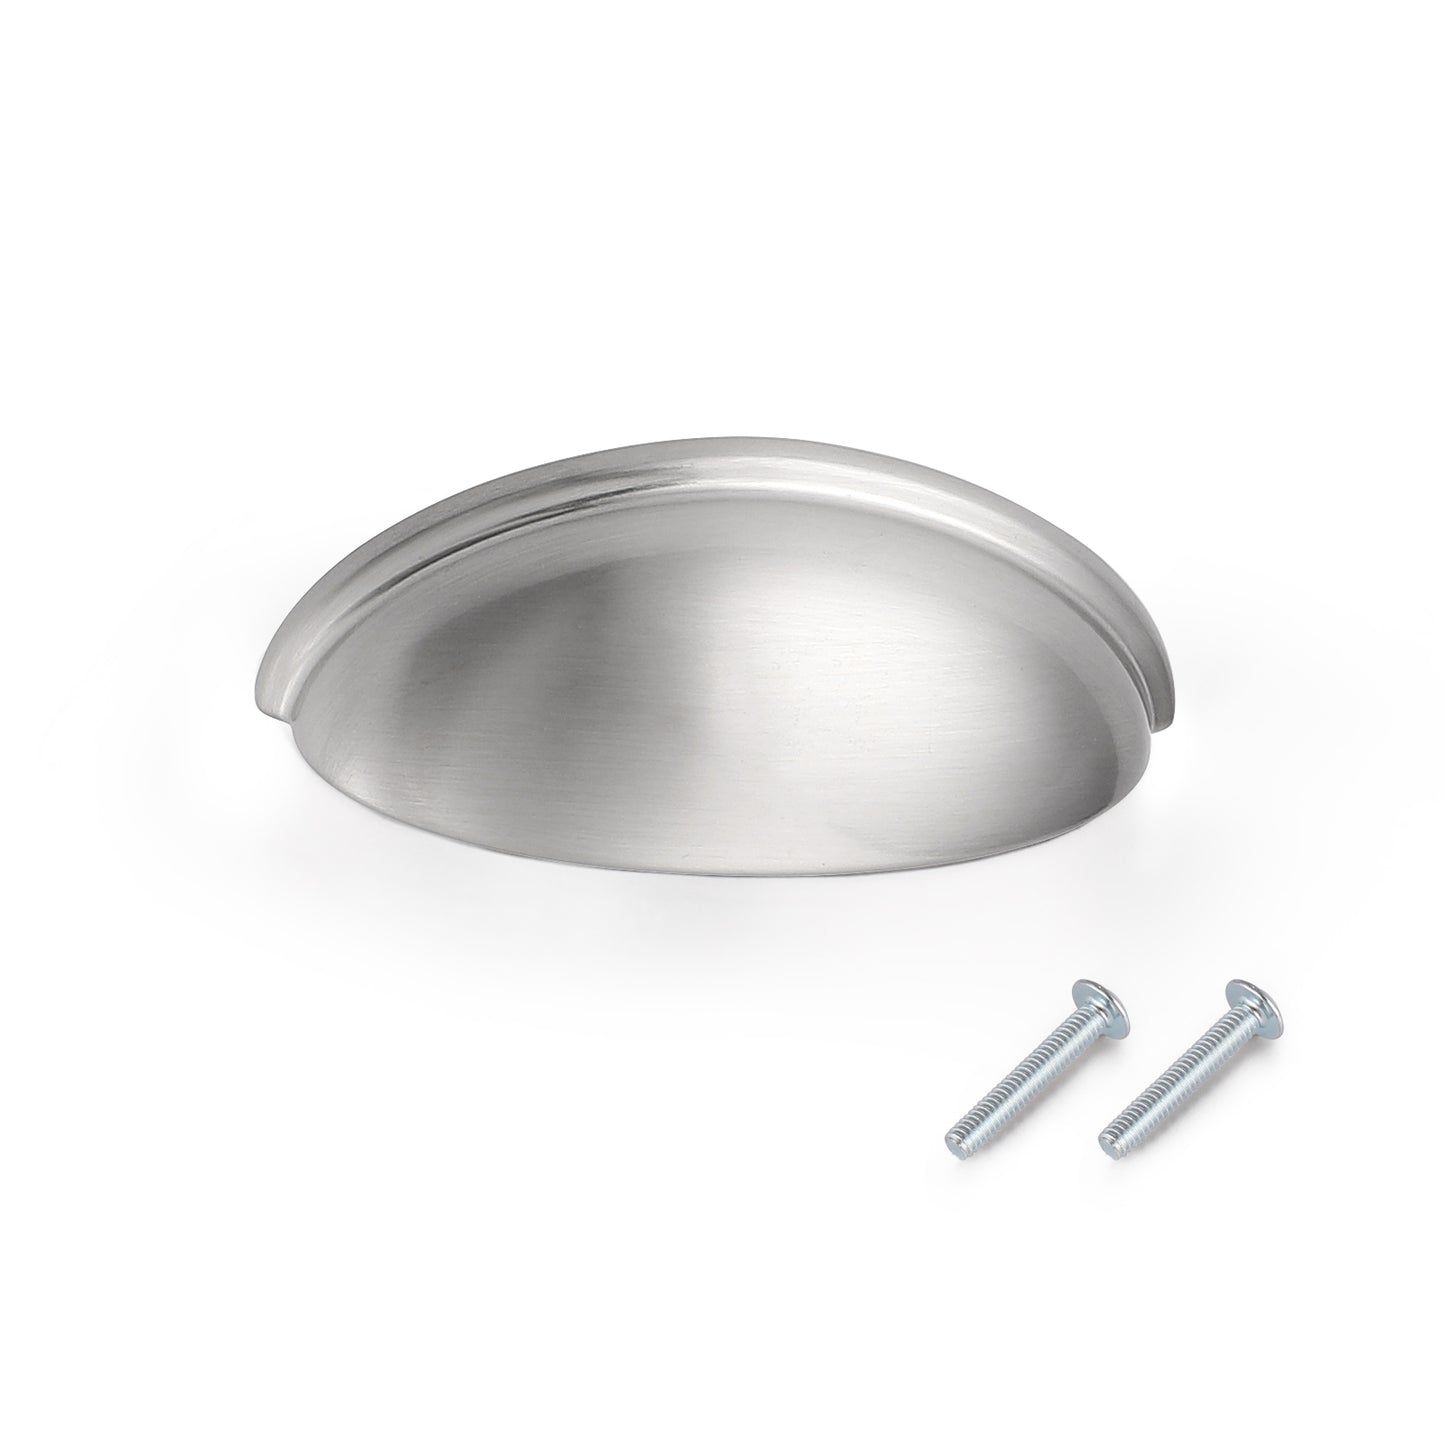 Satin Nickel Cup Pulls 76mm 3inch Hole Centers, Kitchen Cabinets Hardware PD82981 - Probrico